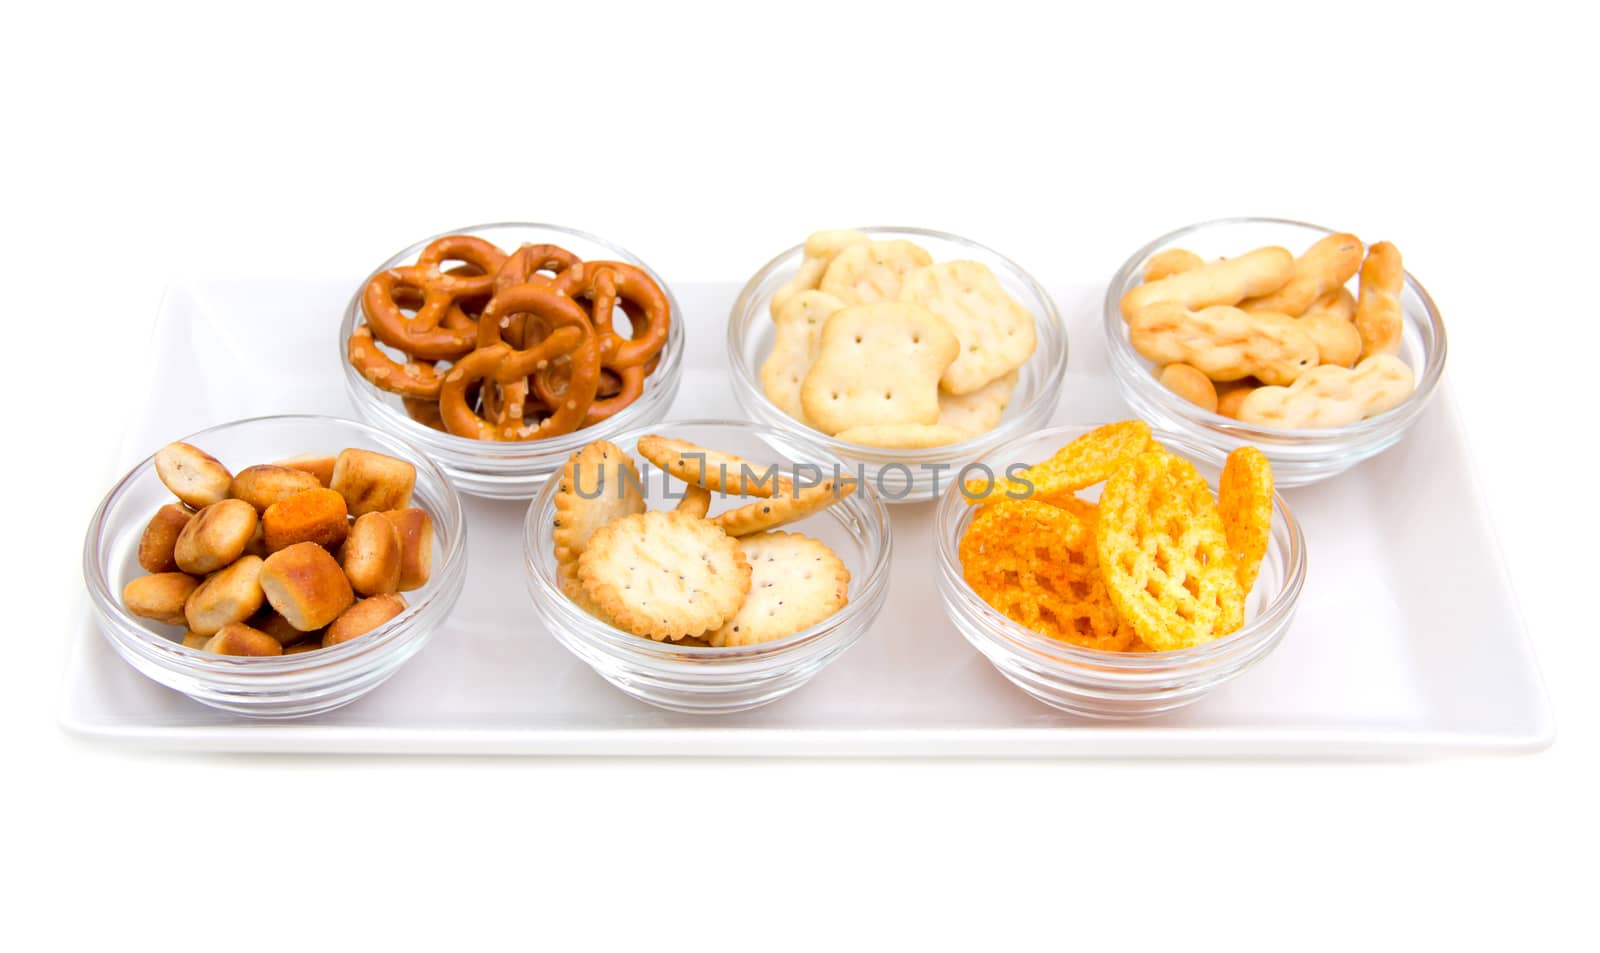 Pretzels in bowls on tray on white background